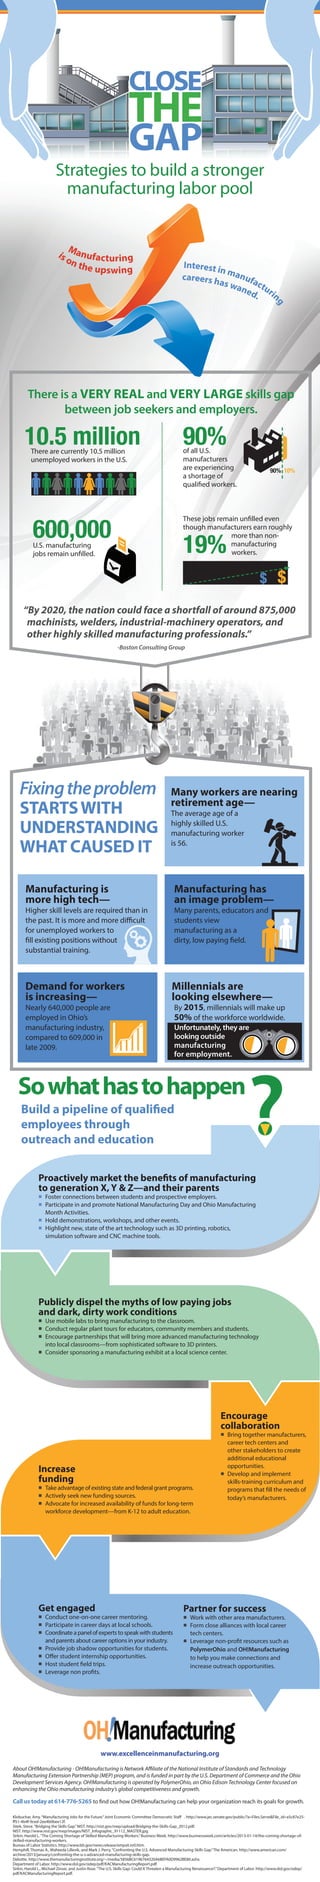 CLOSE 
THE 
GAP 
Strategies to build a stronger 
manufacturing labor pool 
Interest in manufacturing 
careers has waned. 
Manufacturing 
is on the upsw ing 
There is a VERY REAL and VERY LARGE skills gap 
between job seekers and employers. 
90% 
of all U.S. 
manufacturers 
are experiencing 
a shortage of 
quali ed workers. 
90% 10% 
These jobs remain un lled even 
though manufacturers earn roughly 
more than non-manufacturing 
workers. 
10.5 million 
600,000 
U.S. manufacturing 
jobs remain un lled. 
19% 
“By 2020, the nation could face a shortfall of around 875,000 
machinists, welders, industrial-machinery operators, and 
other highly skilled manufacturing professionals.” 
-Boston Consulting Group 
Many workers are nearing 
retirement age— 
The average age of a 
highly skilled U.S. 
manufacturing worker 
is 56. 
Manufacturing has 
an image problem— 
Many parents, educators and 
students view 
manufacturing as a 
dirty, low paying  eld. 
Millennials are 
looking elsewhere— 
By 2015, millennials will make up 
50% of the workforce worldwide. 
Unfortunately, they are 
looking outside 
manufacturing 
for employment. 
There are currently 10.5 million 
unemployed workers in the U.S. 
Fixing the problem 
STARTS WITH 
UNDERSTANDING 
WHAT CAUSED IT 
Manufacturing is 
more high tech— 
Higher skill levels are required than in 
the past. It is more and more di cult 
for unemployed workers to 
 ll existing positions without 
substantial training. 
Demand for workers 
is increasing— 
Nearly 640,000 people are 
employed in Ohio’s 
manufacturing industry, 
compared to 609,000 in 
late 2009. 
So what has to happen 
Build a pipeline of quali ed 
employees through 
outreach and education 
Proactively market the bene ts of manufacturing 
to generation X, Y  Z—and their parents 
 Foster connections between students and prospective employers. 
 Participate in and promote National Manufacturing Day and Ohio Manufacturing 
Month Activities. 
 Hold demonstrations, workshops, and other events. 
 Highlight new, state of the art technology such as 3D printing, robotics, 
simulation software and CNC machine tools. 
Publicly dispel the myths of low paying jobs 
and dark, dirty work conditions 
 Use mobile labs to bring manufacturing to the classroom. 
 Conduct regular plant tours for educators, community members and students. 
 Encourage partnerships that will bring more advanced manufacturing technology 
into local classrooms—from sophisticated software to 3D printers. 
 Consider sponsoring a manufacturing exhibit at a local science center. 
Increase 
funding 
 Take advantage of existing state and federal grant programs. 
 Actively seek new funding sources. 
 Advocate for increased availability of funds for long-term 
workforce development—from K-12 to adult education. 
Get engaged 
 Conduct one-on-one career mentoring. 
 Participate in career days at local schools. 
 Coordinate a panel of experts to speak with students 
and parents about career options in your industry. 
 Provide job shadow opportunities for students. 
 O er student internship opportunities. 
 Host student  eld trips. 
 Leverage non pro ts. 
Partner for success 
 Work with other area manufacturers. 
 Form close alliances with local career 
tech centers. 
 Leverage non-pro t resources such as 
PolymerOhio and OH!Manufacturing 
to help you make connections and 
increase outreach opportunities. 
www.excellenceinmanufacturing.org 
Encourage 
collaboration 
 Bring together manufacturers, 
career tech centers and 
other stakeholders to create 
additional educational 
opportunities. 
 Develop and implement 
skills-training curriculum and 
programs that  ll the needs of 
today’s manufacturers. 
About OH!Manufacturing - OH!Manufacturing is Network A liate of the National Institute of Standards and Technology 
Manufacturing Extension Partnership (MEP) program, and is funded in part by the U.S. Department of Commerce and the Ohio 
Development Services Agency. OH!Manufacturing is operated by PolymerOhio, an Ohio Edison Technology Center focused on 
enhancing the Ohio manufacturing industry’s global competitiveness and growth. 
Call us today at 614-776-5265 to  nd out how OH!Manufacturing can help your organization reach its goals for growth. 
Klobuchar, Amy. “Manufacturing Jobs for the Future.” Joint Economic Committee Democratic Sta . http://www.jec.senate.gov/public/?a=Files.ServeFile_id=a5c87e25- 
 51-4b4f-9ced-2ee4b0bee12f. 
Sitek, Steve. “Bridging the Skills Gap.” NIST. http://nist.gov/mep/upload/Bridging-the-Skills-Gap_2012.pdf. 
NIST. http://www.nist.gov/mep/images/NIST_Infographic_91112_MASTER.jpg. 
Sirkin, Harold L. “The Coming Shortage of Skilled Manufacturing Workers.” Business Week. http://www.businessweek.com/articles/2013-01-14/the-coming-shortage-of-skilled- 
manufacturing-workers. 
Bureau of Labor Statistics. http://www.bls.gov/news.release/empsit.nr0.htm. 
Hemphill, Thomas A., Waheeda Lillevik, and Mark J. Perry. “Confronting the U.S. Advanced Manufacturing Skills Gap.” The American. http://www.american.com/ 
archive/2013/january/confronting-the-u-s-advanced-manufacturing-skills-gap. 
Deloitte. http://www.themanufacturinginstitute.org/~/media/5856BC6196764320A6BEFA0D9962BE80.ashx. 
Department of Labor. http://www.dol.gov/odep/pdf/KACManufacturingReport.pdf. 
Sirkin, Harold L., Michael Zinser, and Justin Rose. “The U.S. Skills Gap: Could It Threaten a Manufacturing Renaissance?.” Department of Labor. http://www.dol.gov/odep/ 
pdf/KACManufacturingReport.pdf. 
